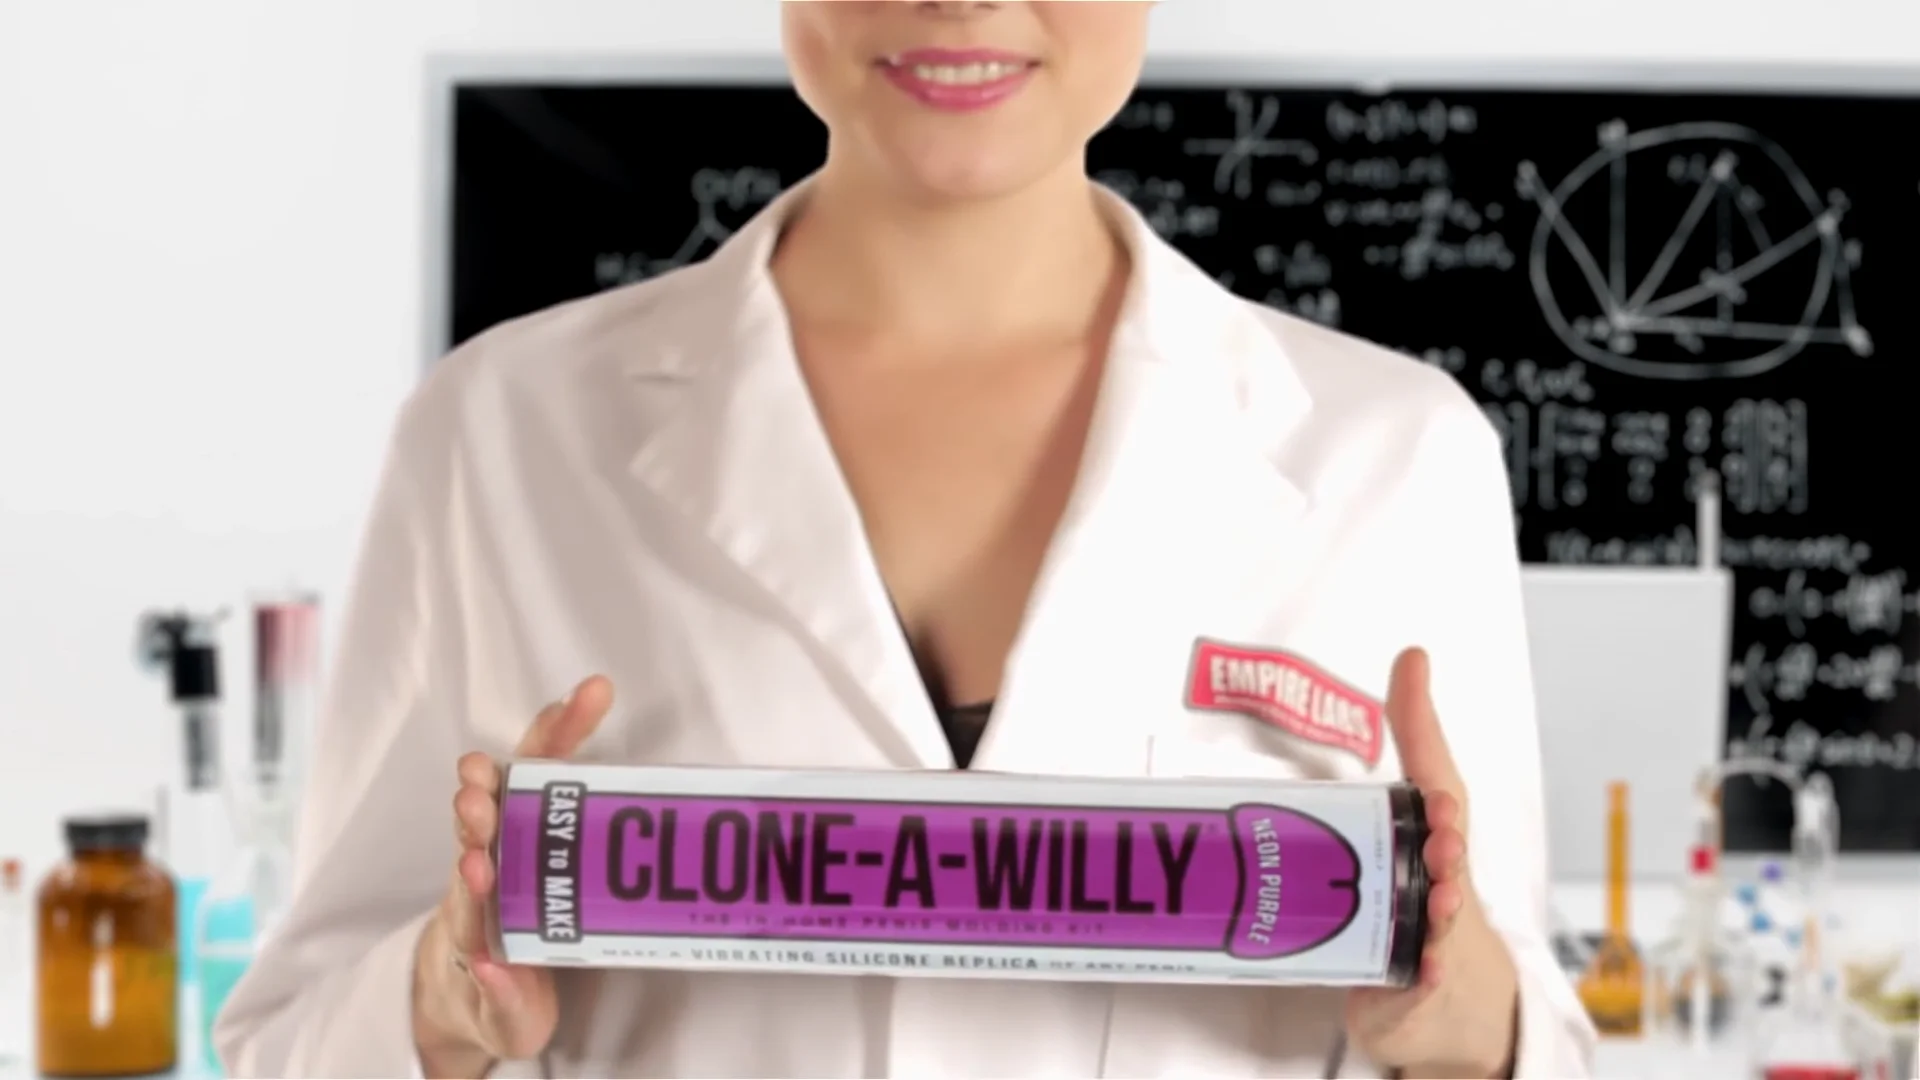 Clone A Willy Instructional Video.mp4 on Vimeo